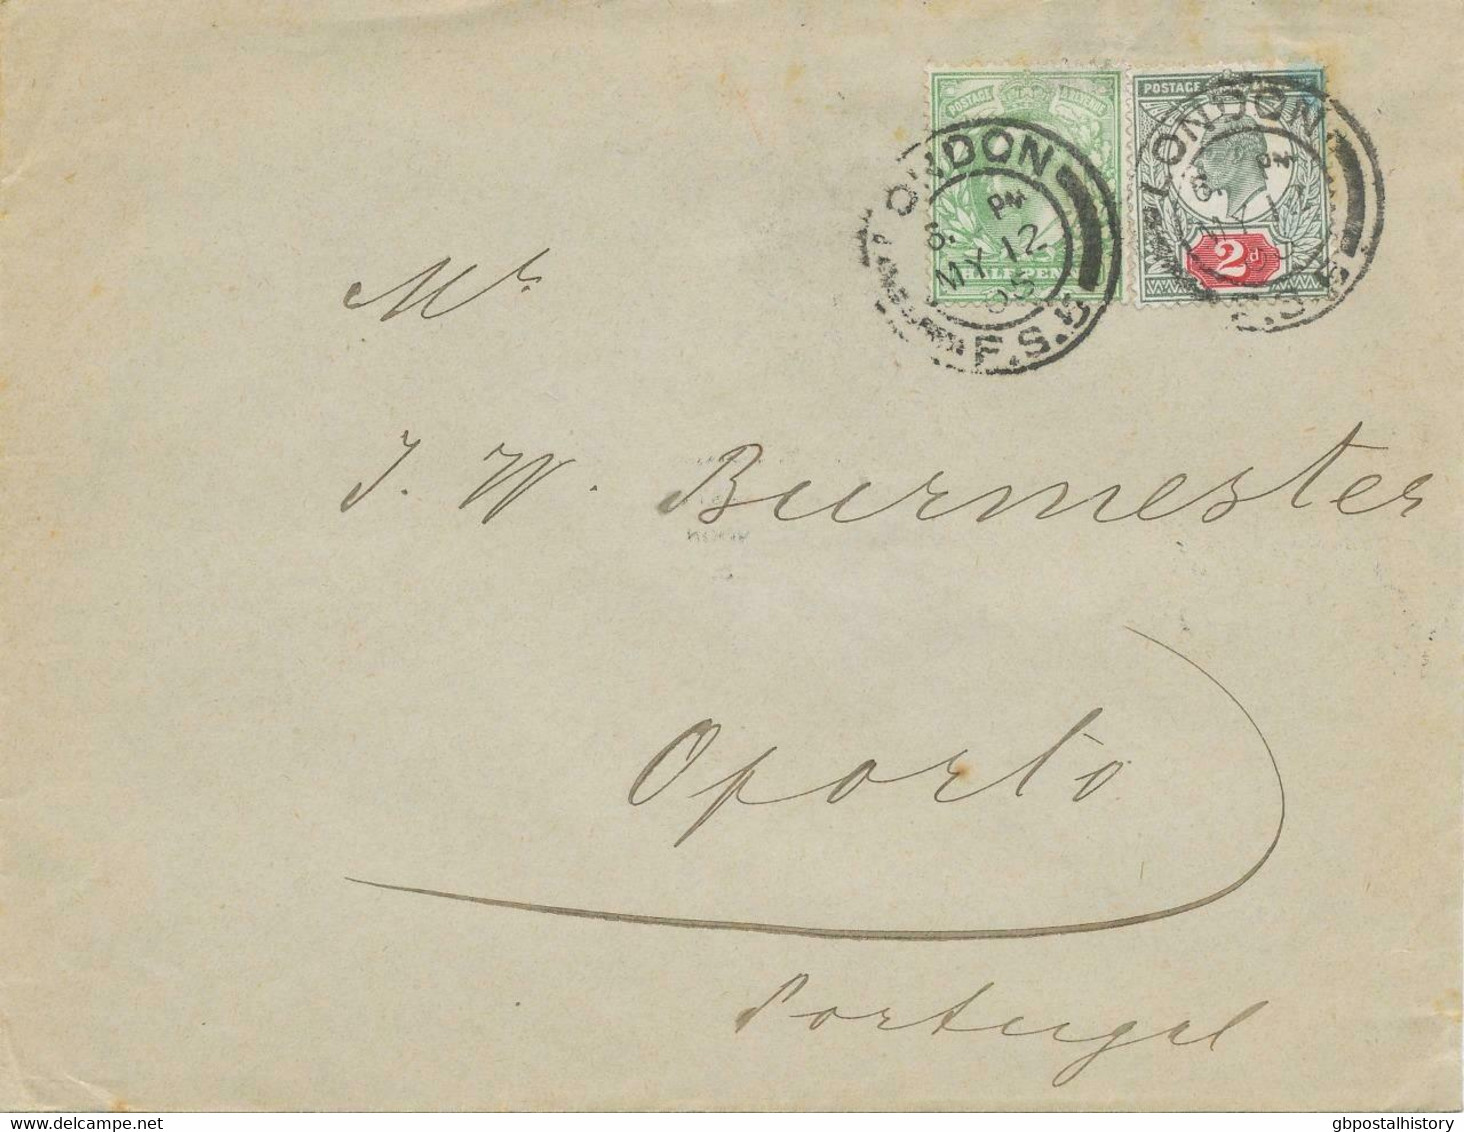 GB 1905 King EVII 1/2 D And 2 D VFU Cover To PORTUGAL, MAJOR VARIETY: 2 D RR!! - Errors, Freaks & Oddities (EFOs